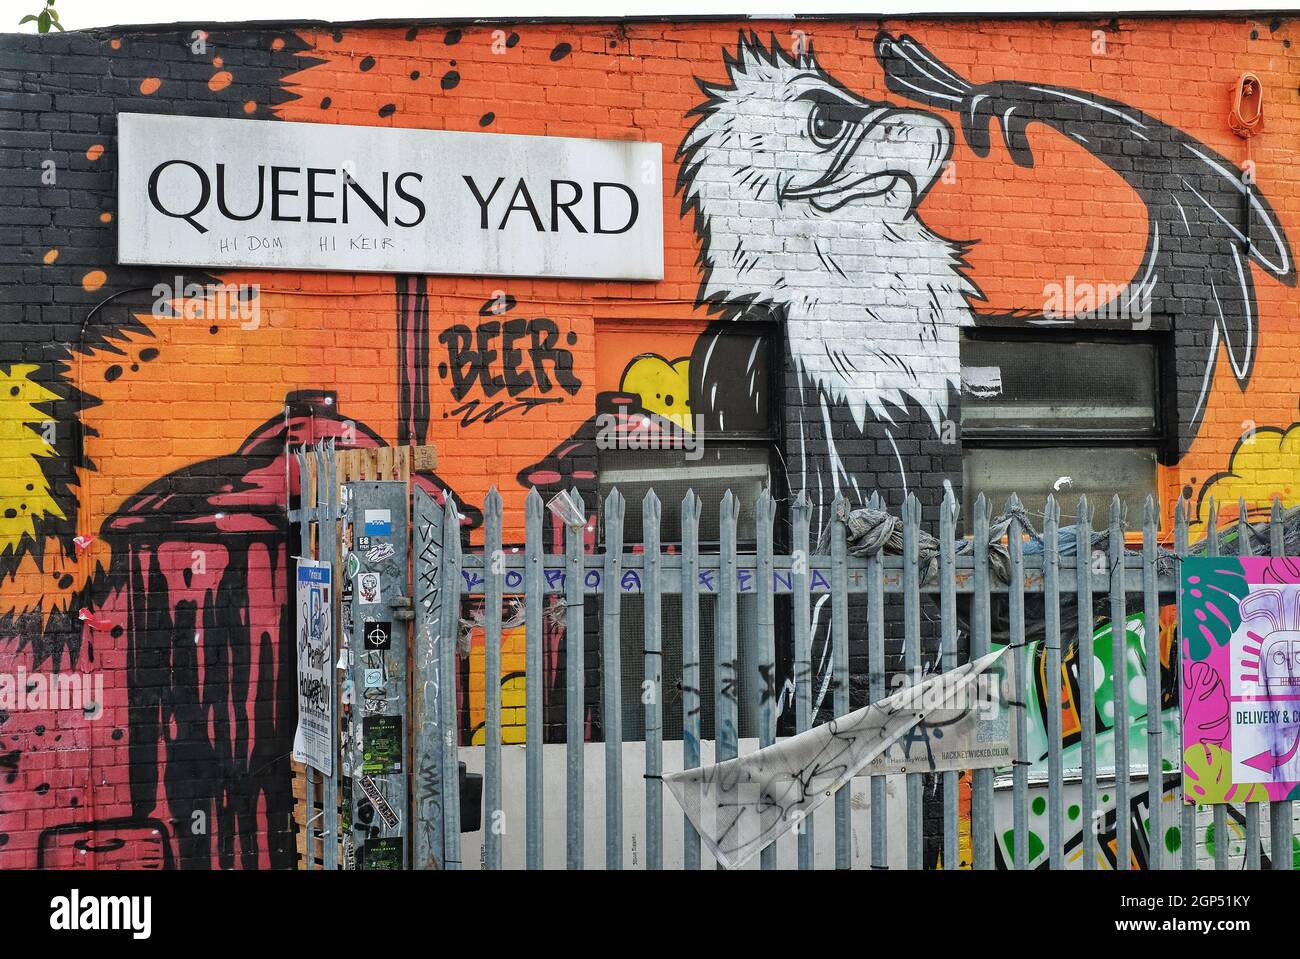 Signage and mural for Queen's Yard in Hackney Wick, East London. Queens Yard is home to breweries and restaurants and holds an annual summer party. Stock Photo